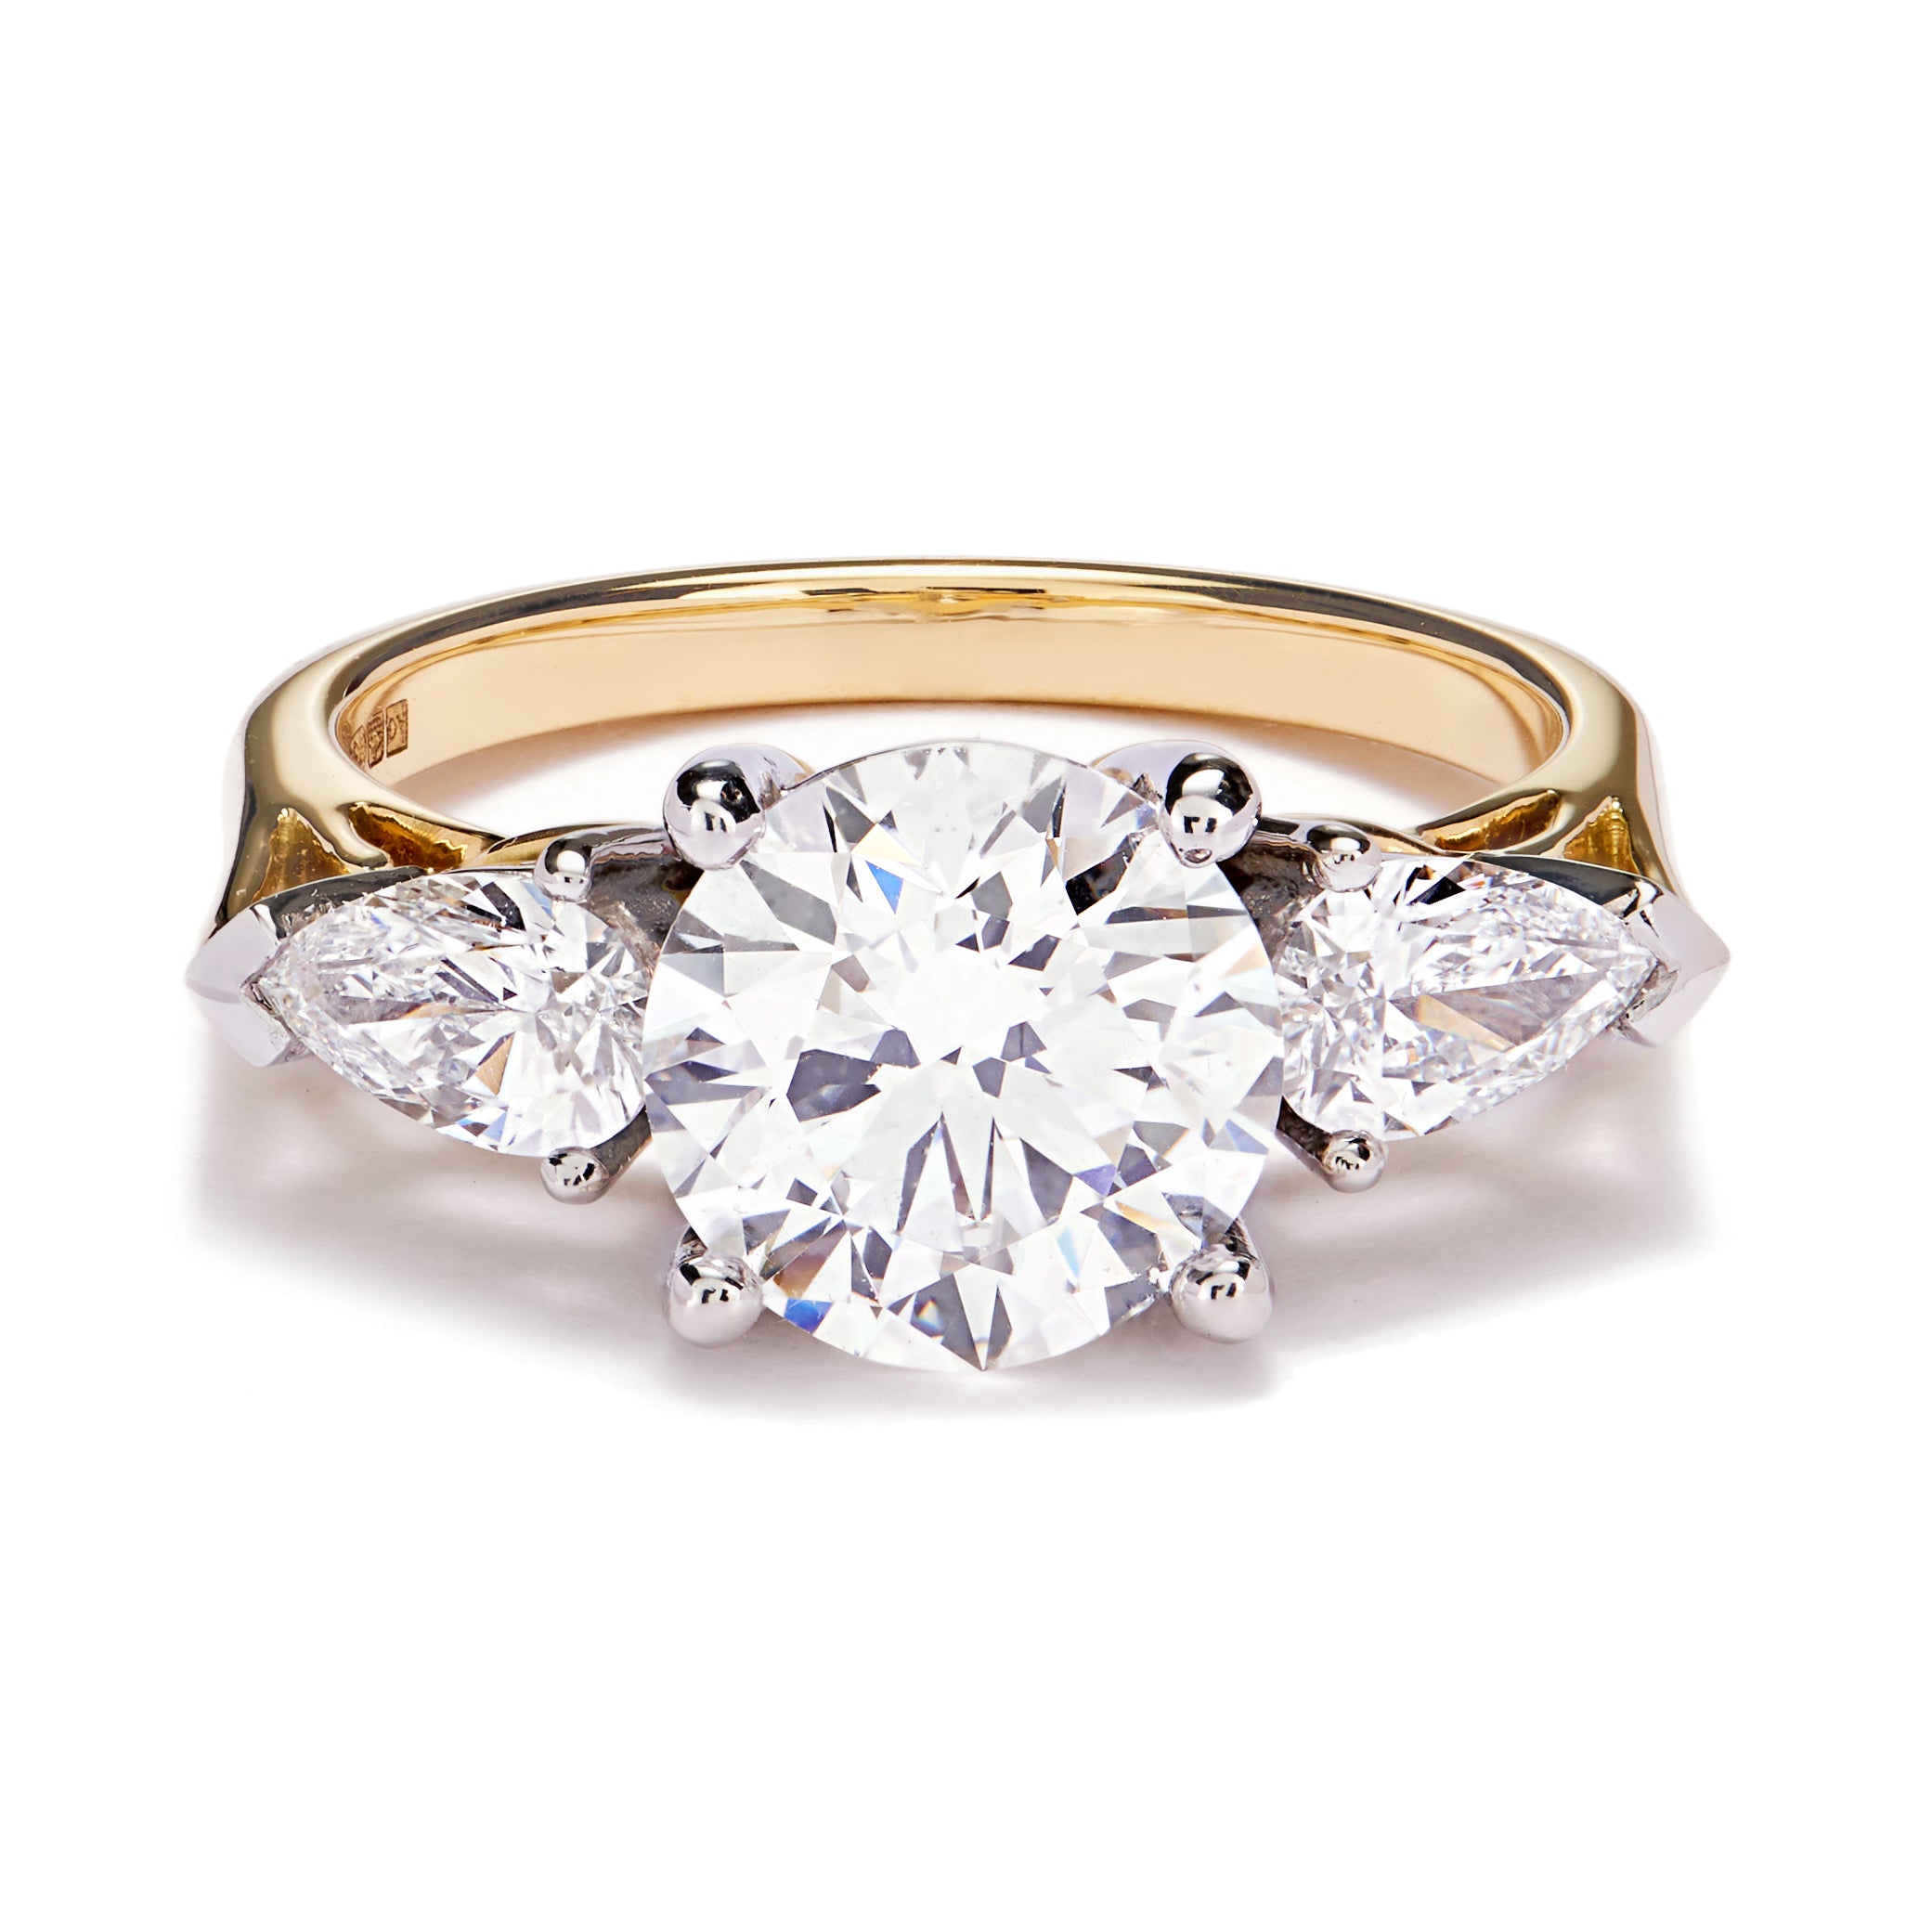 How to choose for the perfect diamond for your engagement ring…